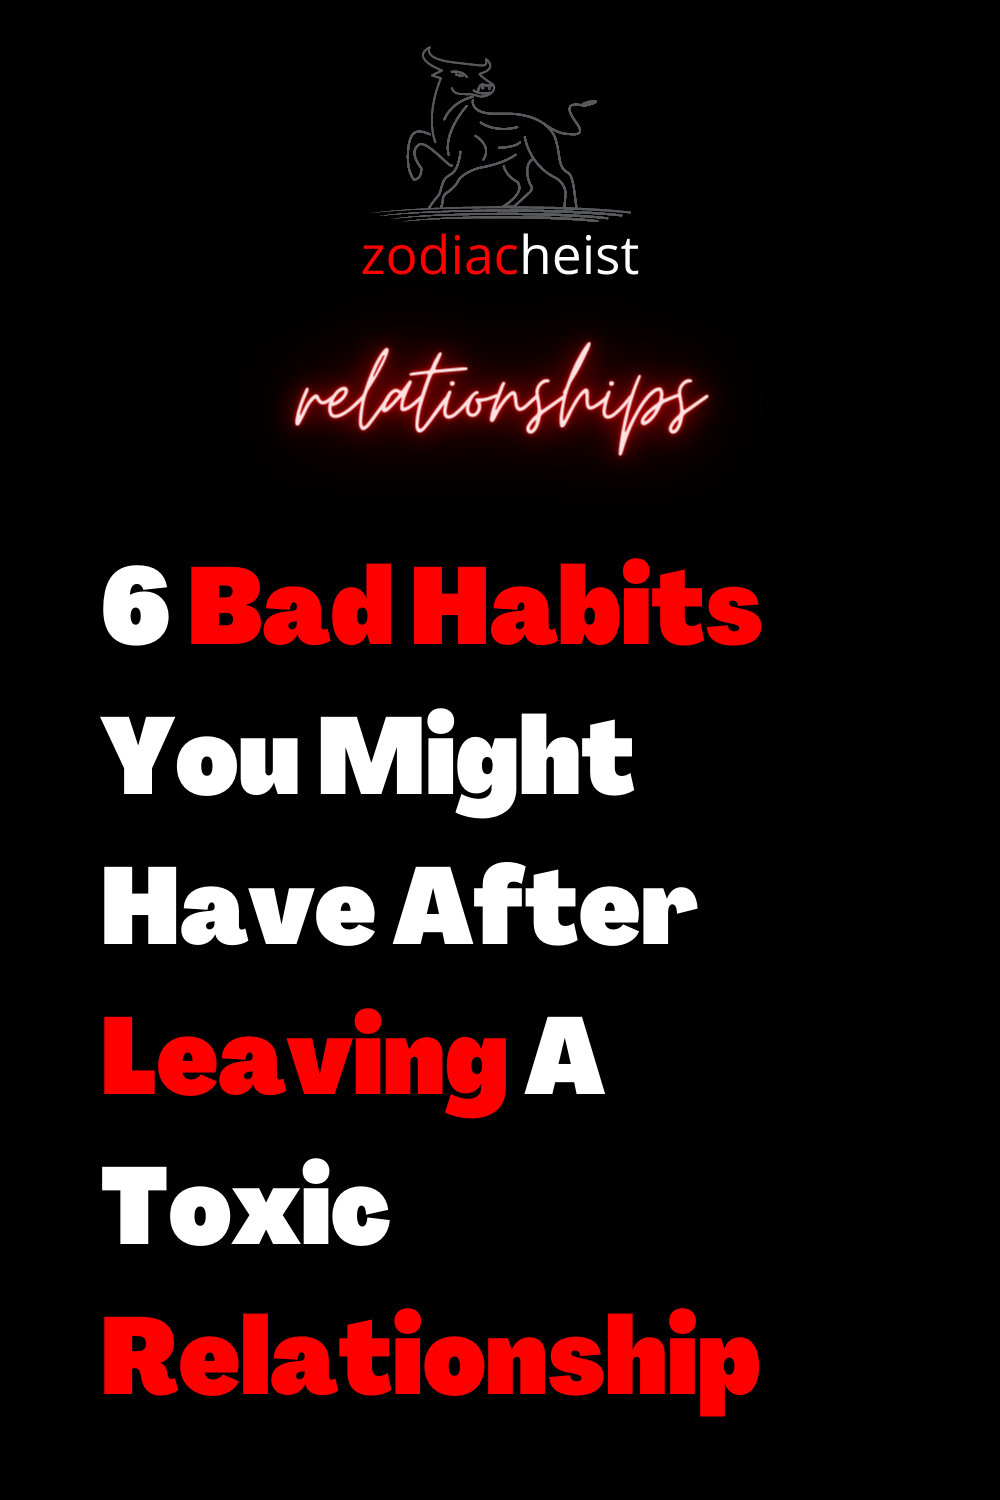 6 Bad Habits You Might Have After Leaving A Toxic Relationship